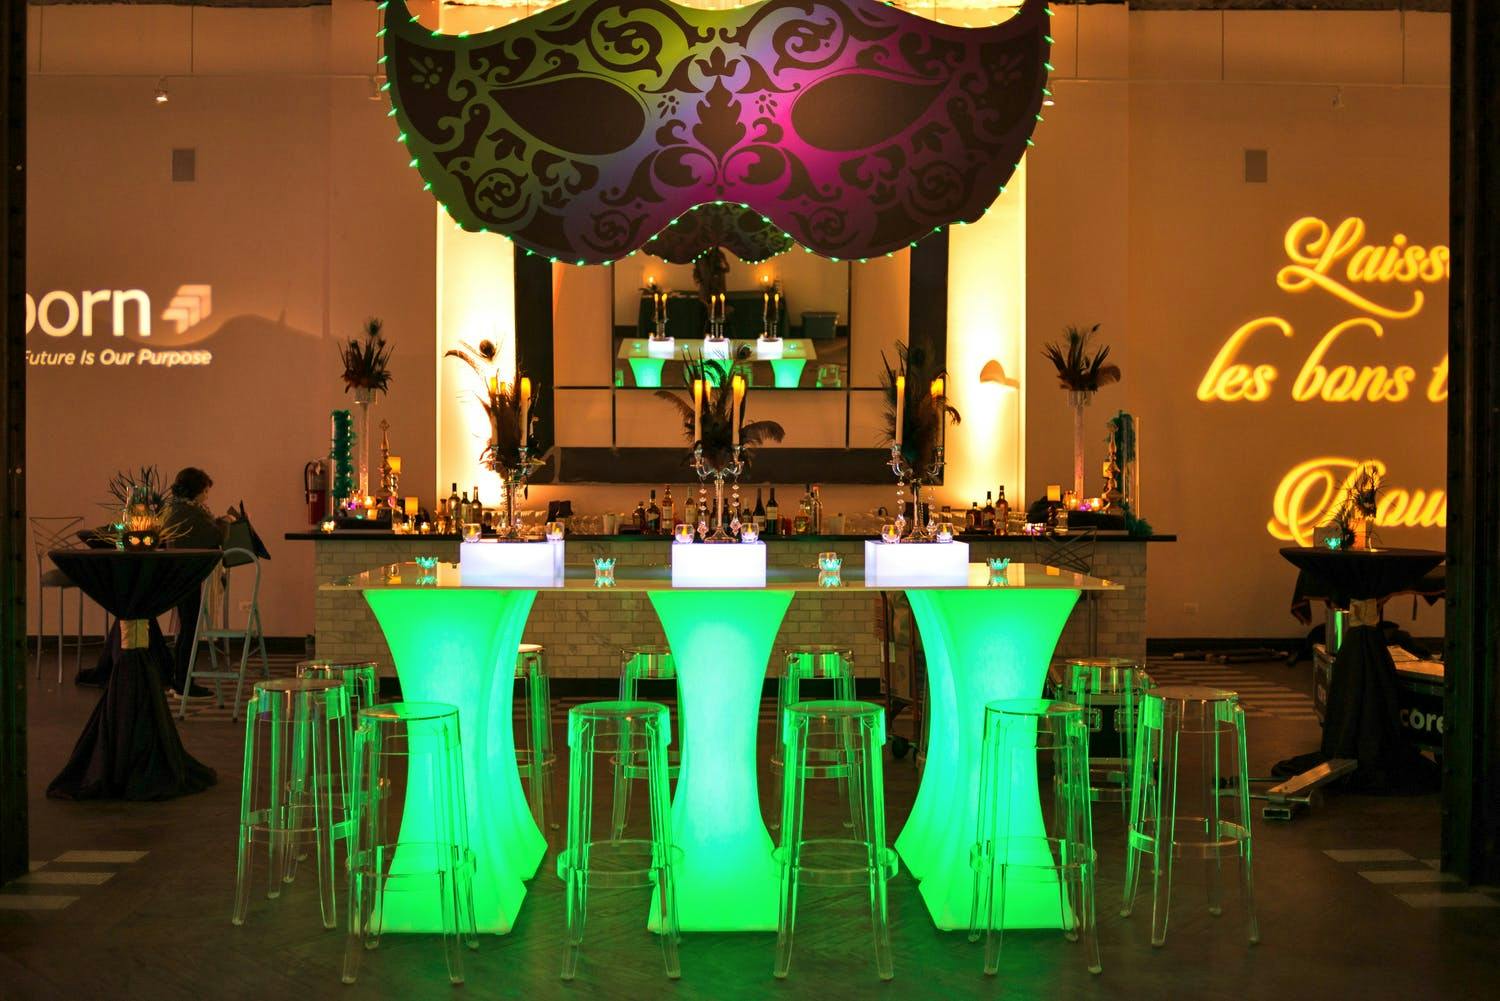 Mardi Gras Corporate Party Bar Area With Green Neon Table Lighting and Masked Backdrop | PartySlate